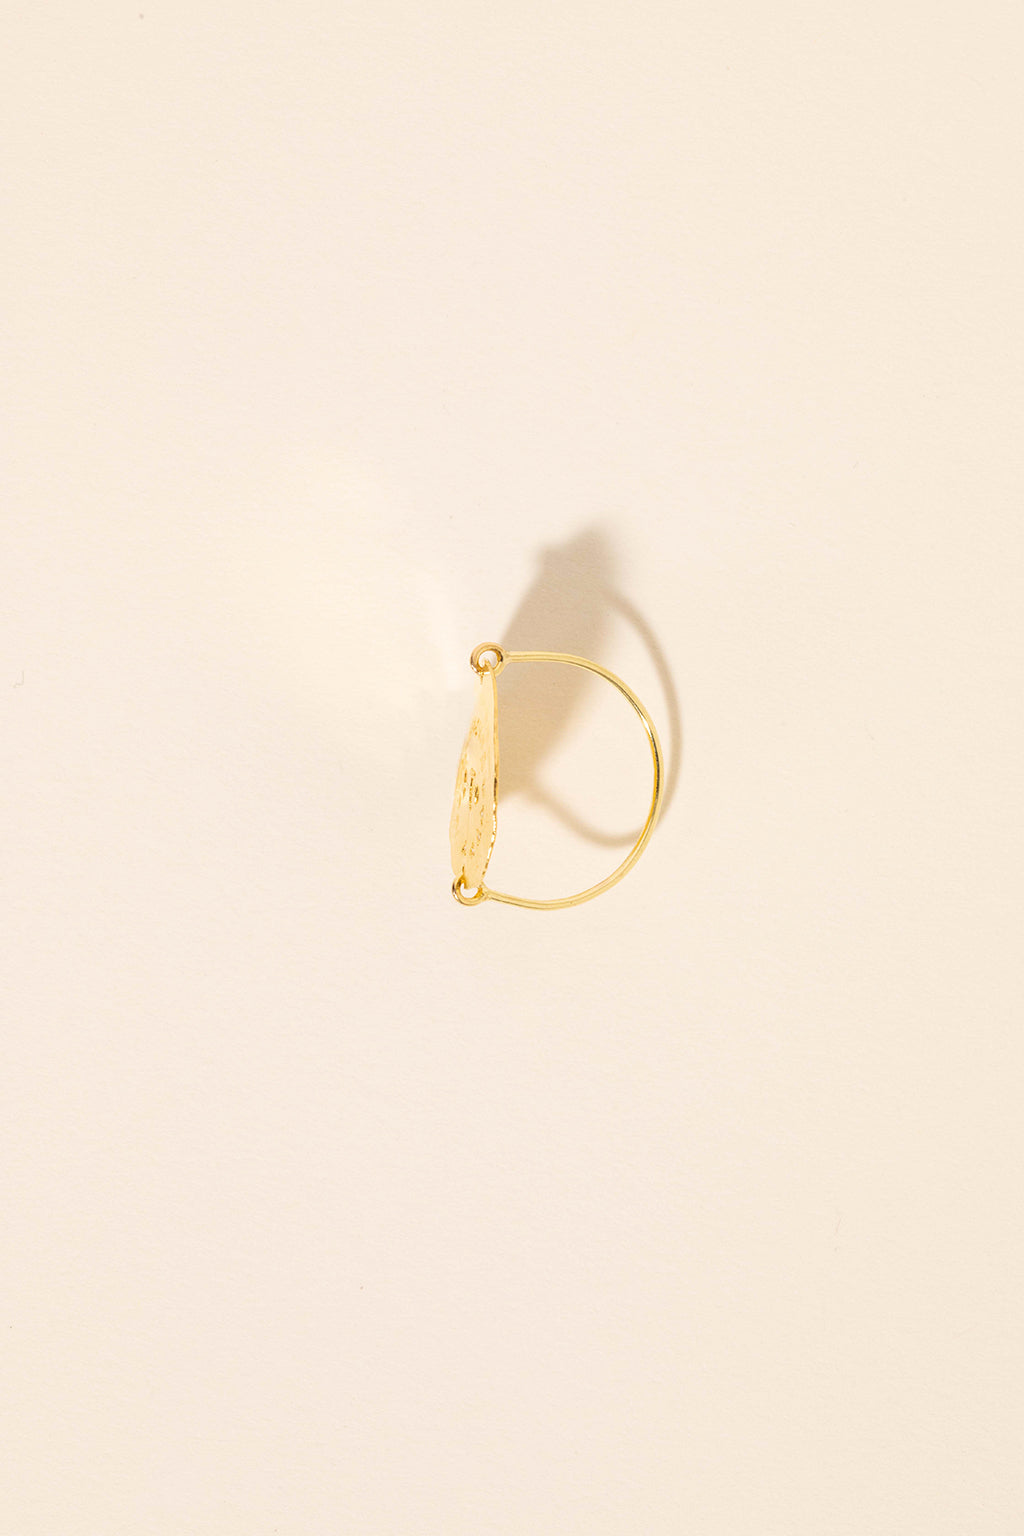 No. 03 Collection 01 | RING - TREMISSIS